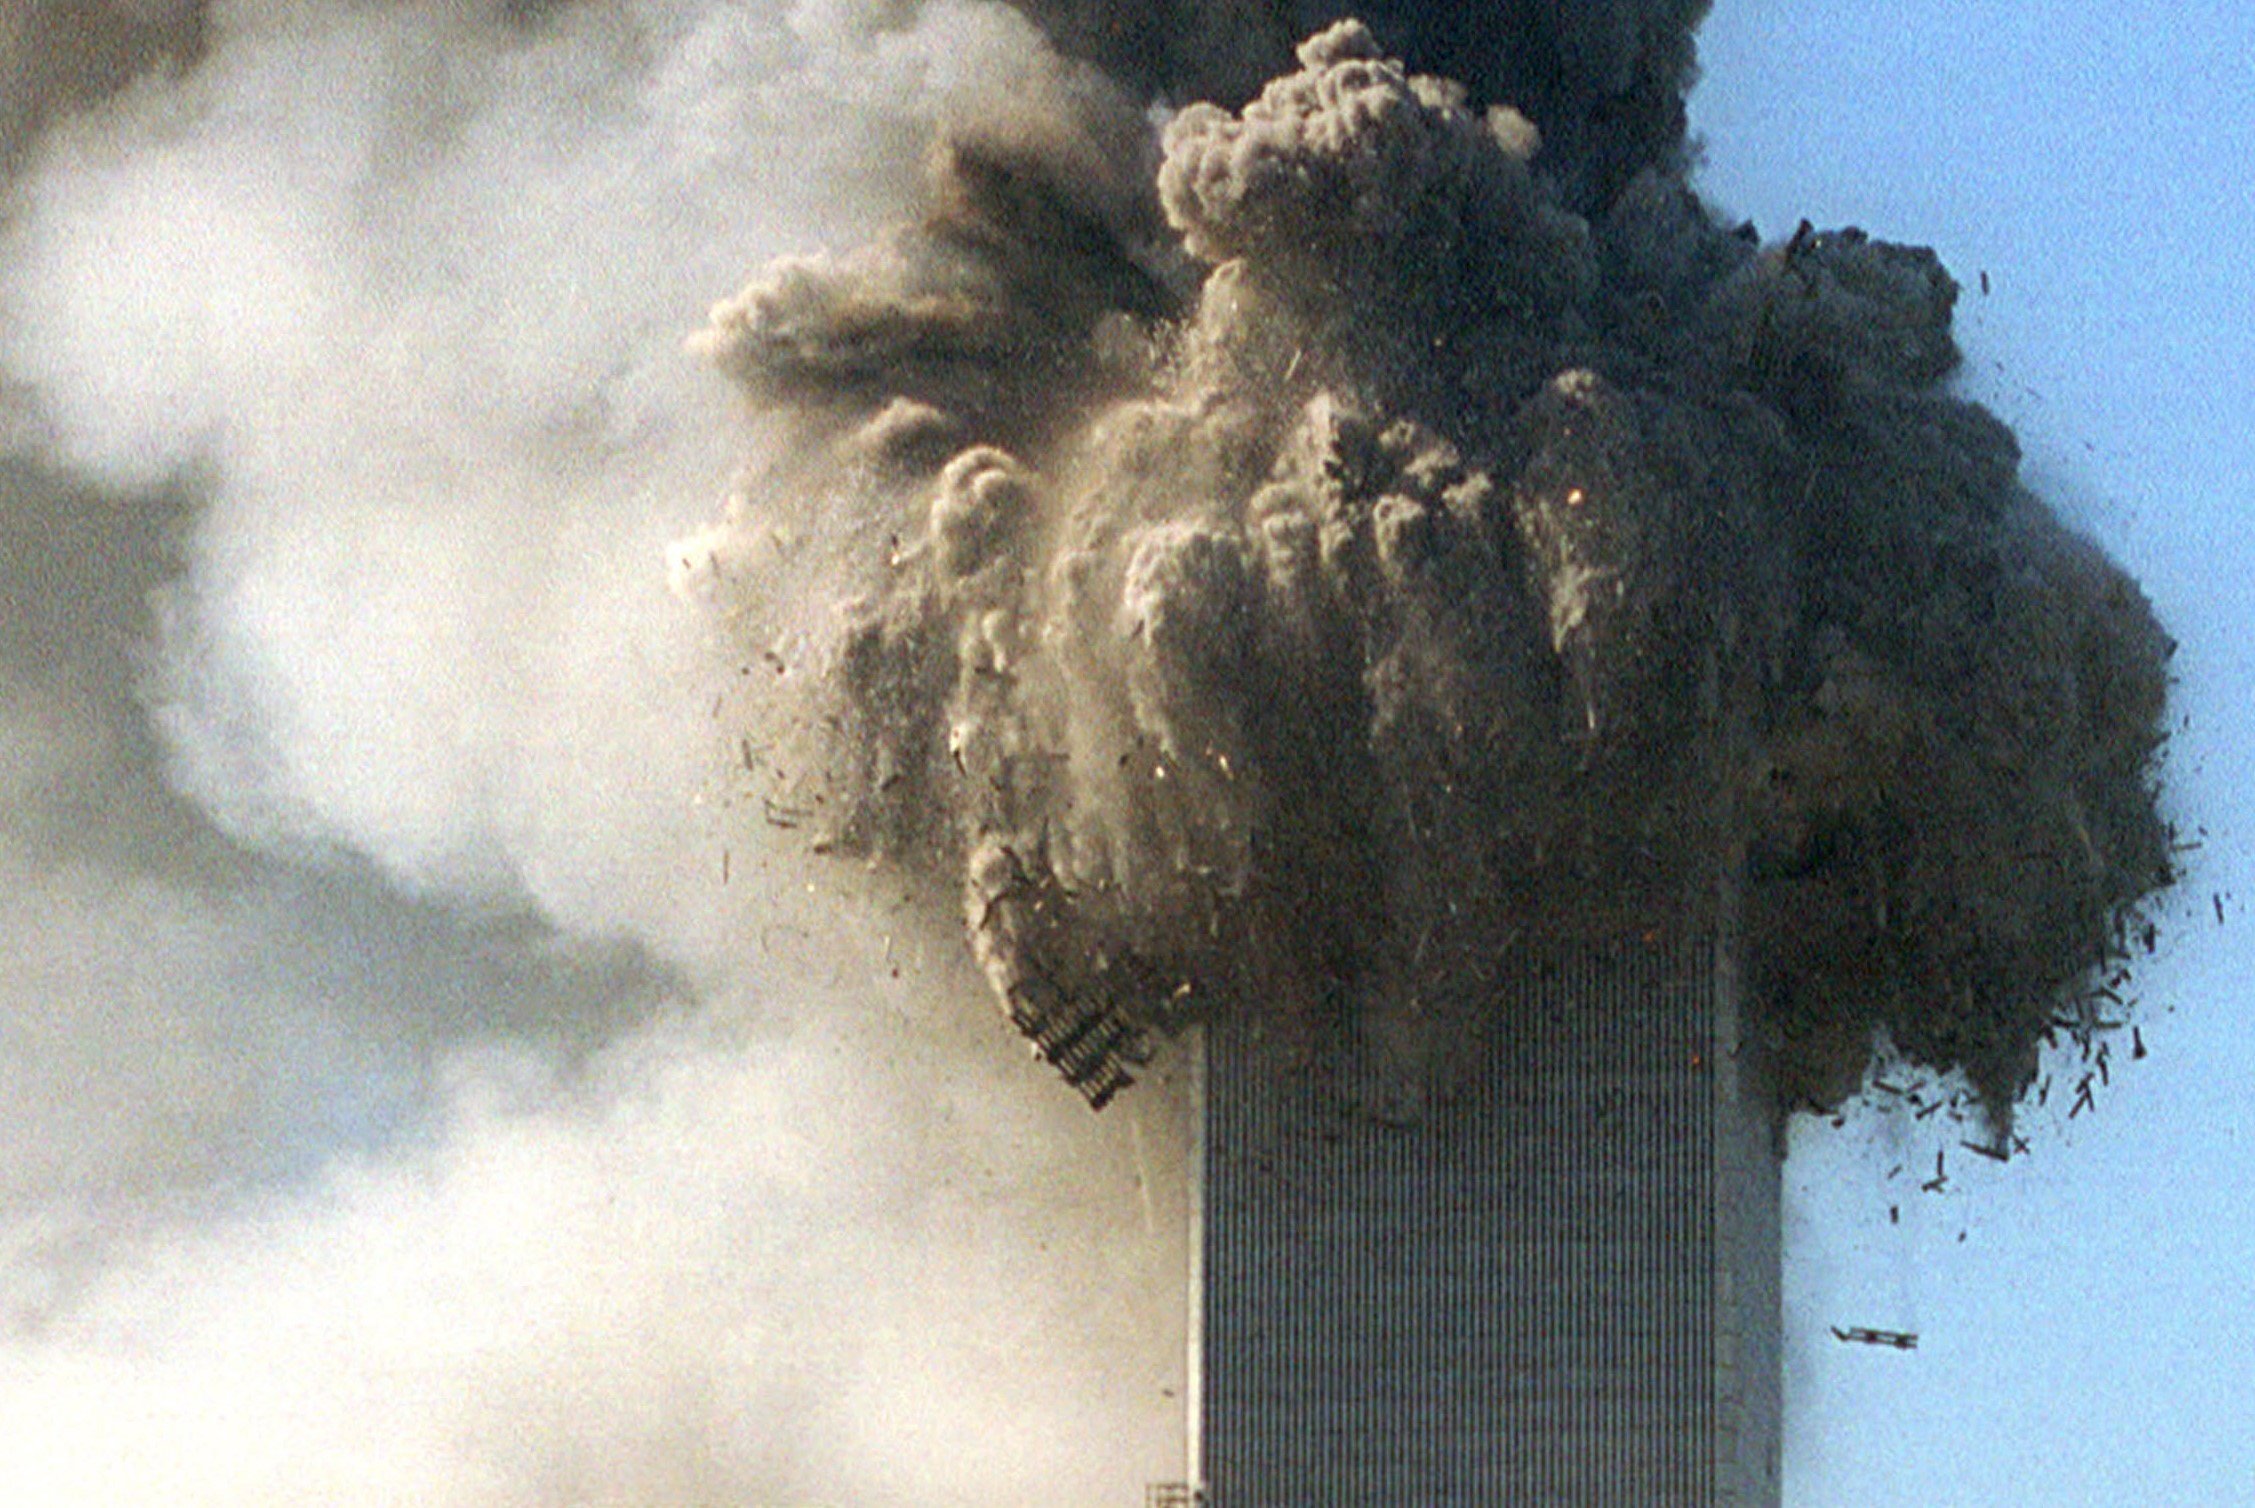 Latest Ripon Forum looks at the lessons of 9/11